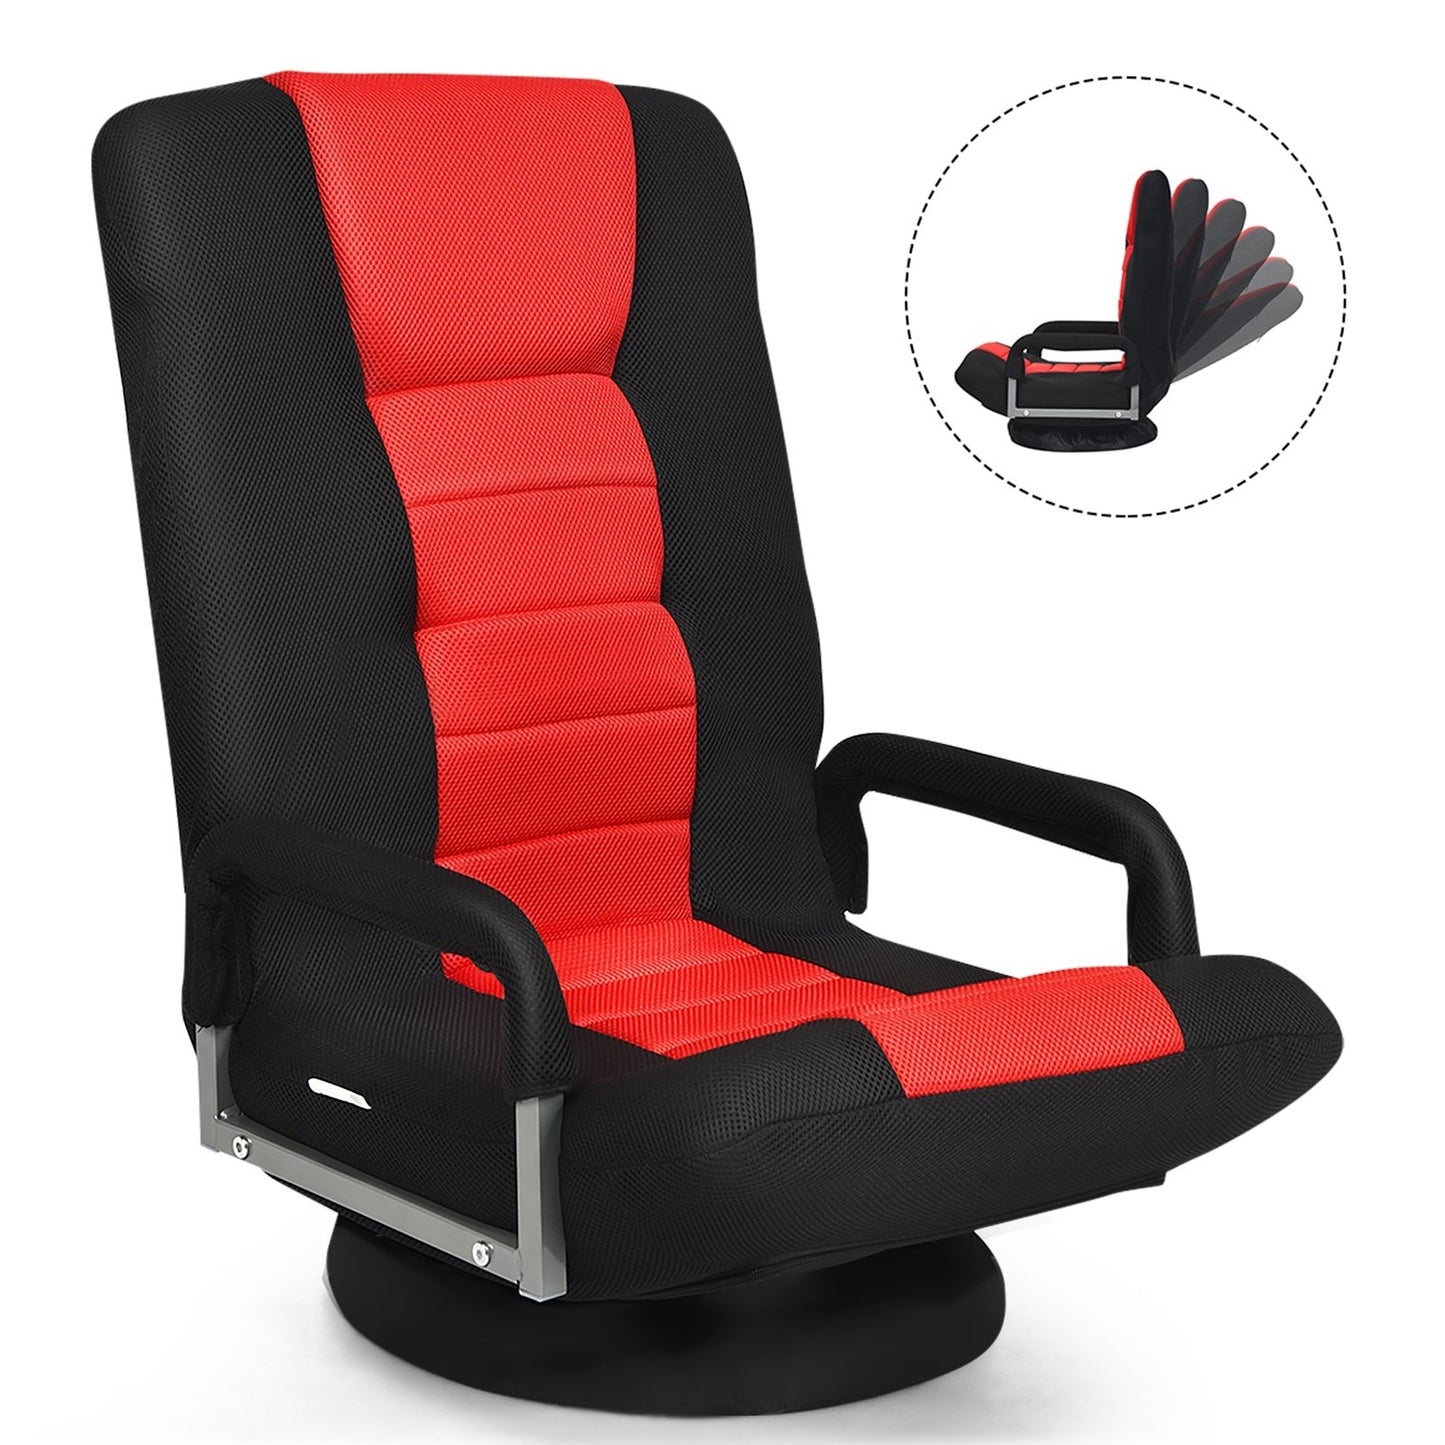 360-Degree Swivel Gaming Floor Chair with Foldable Adjustable Backrest, Red at Gallery Canada